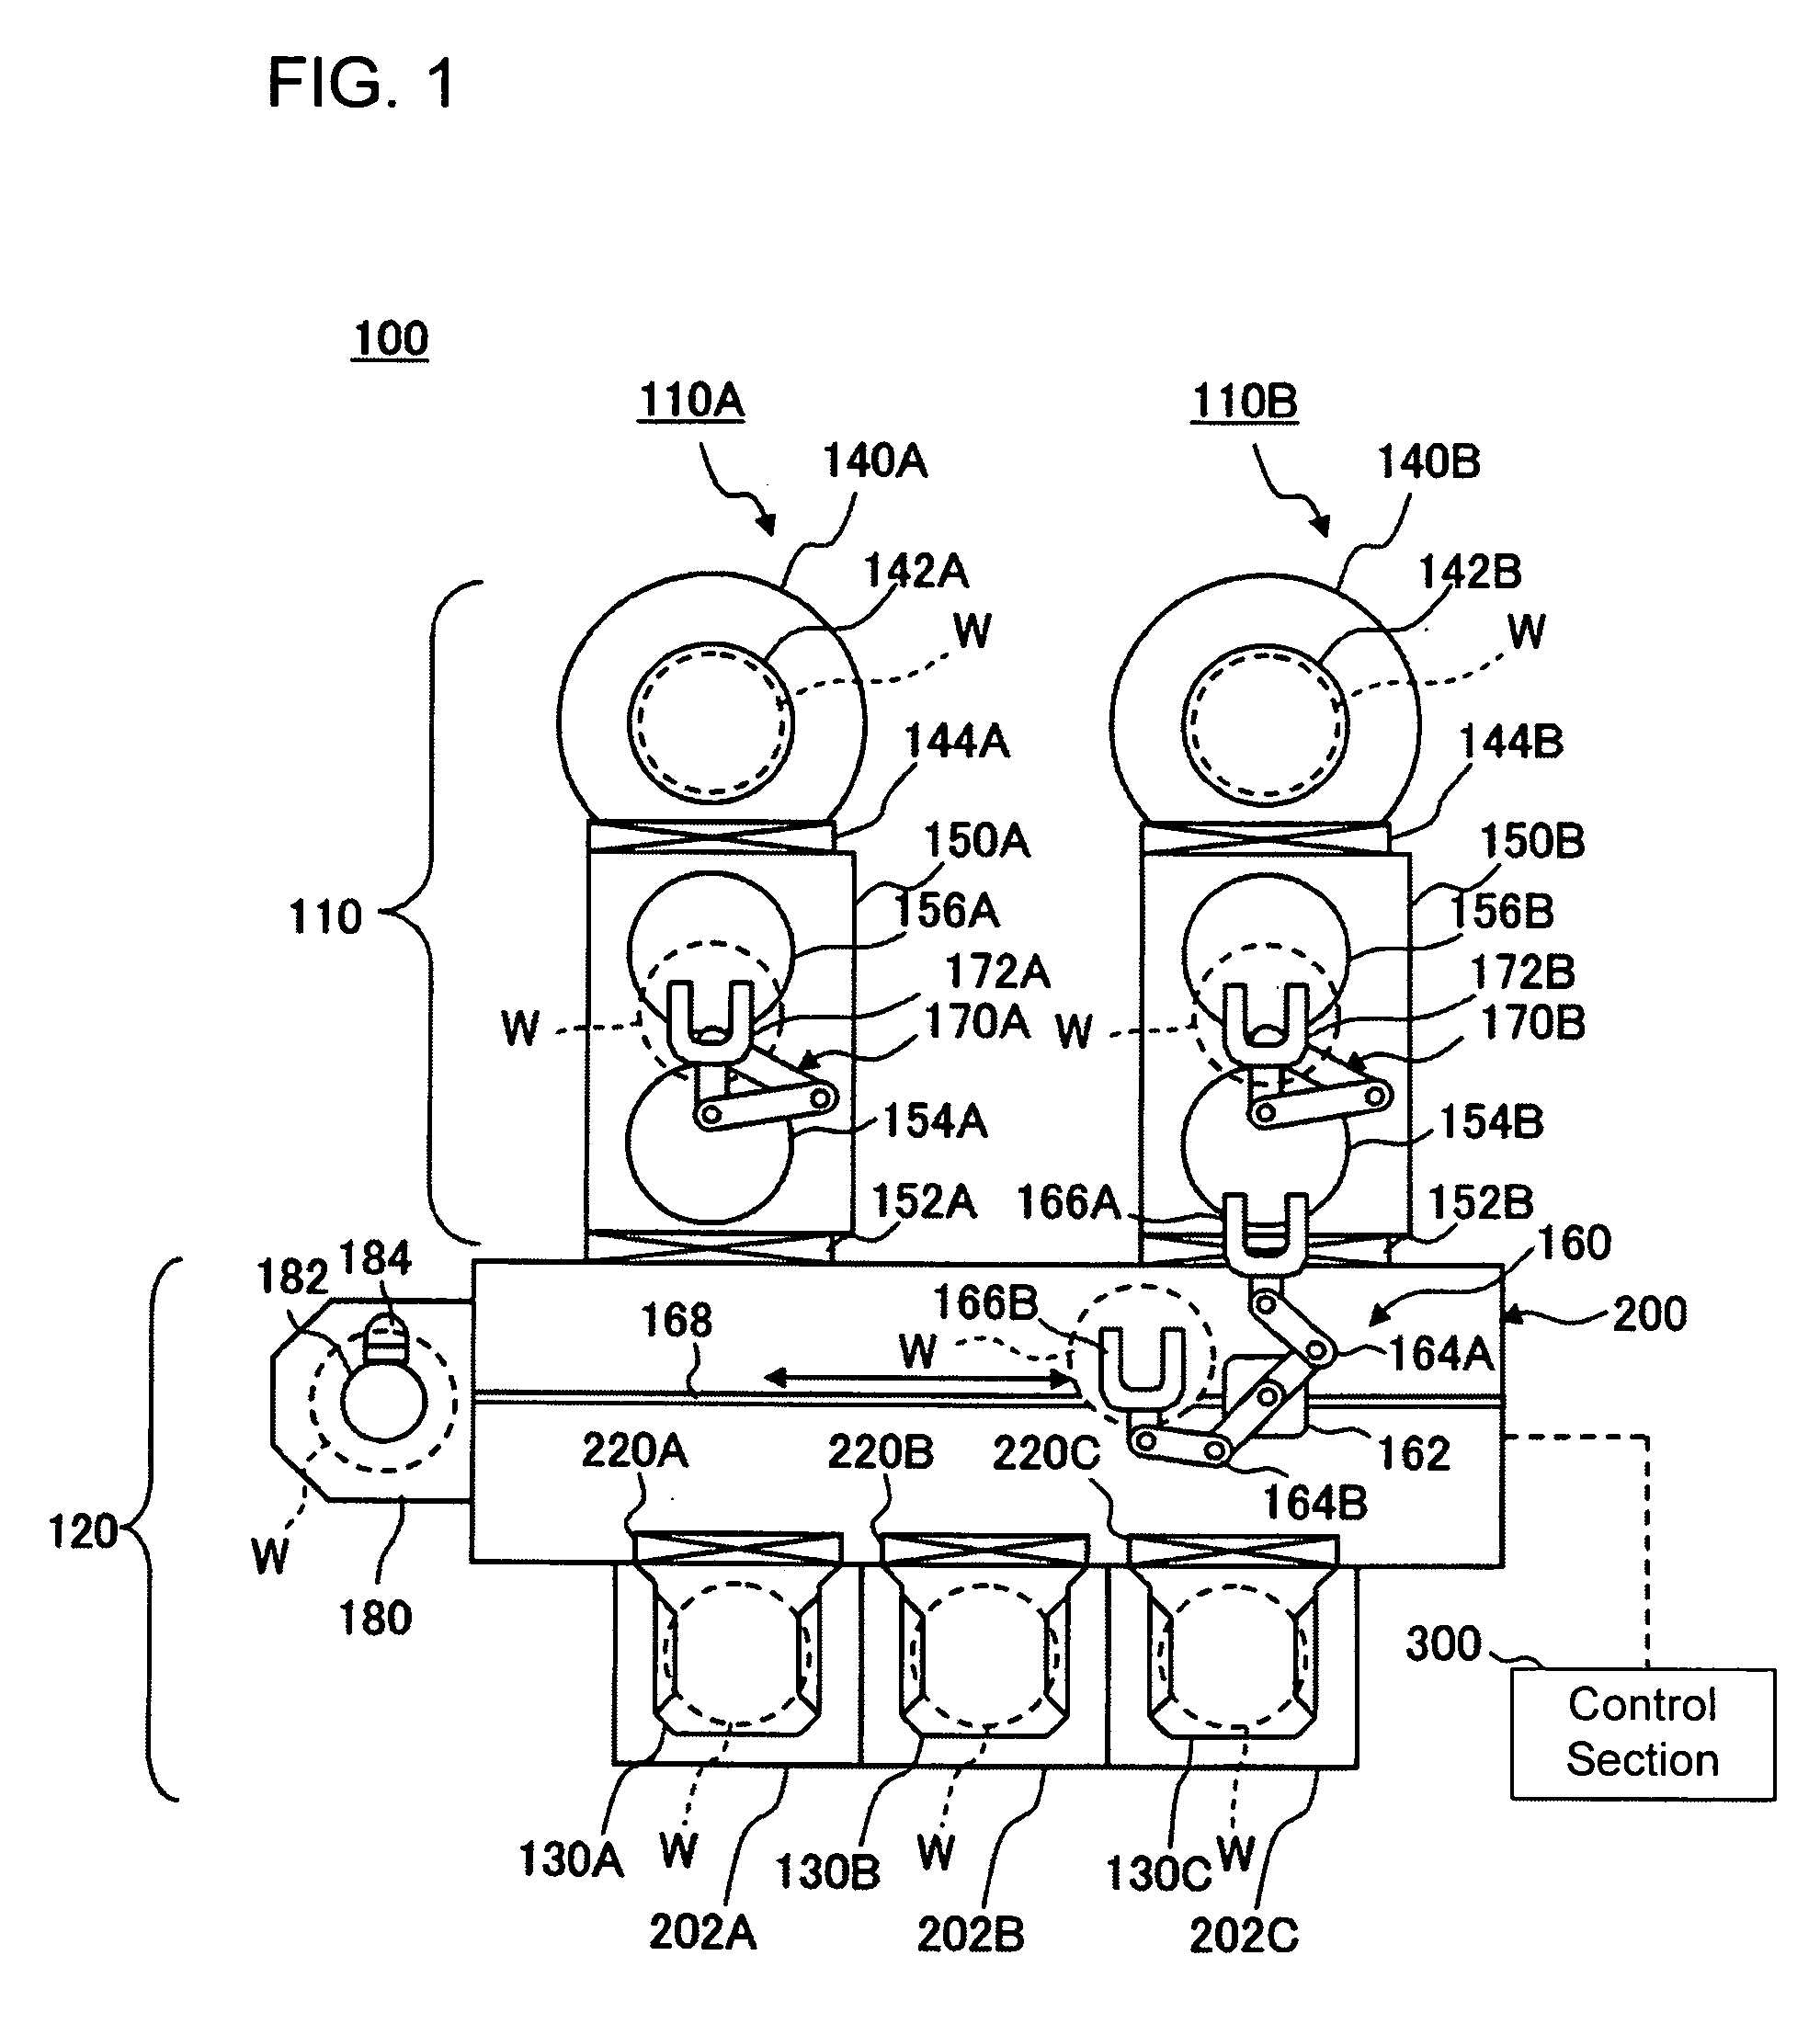 Substrate transfer apparatus and method for controlling down flow